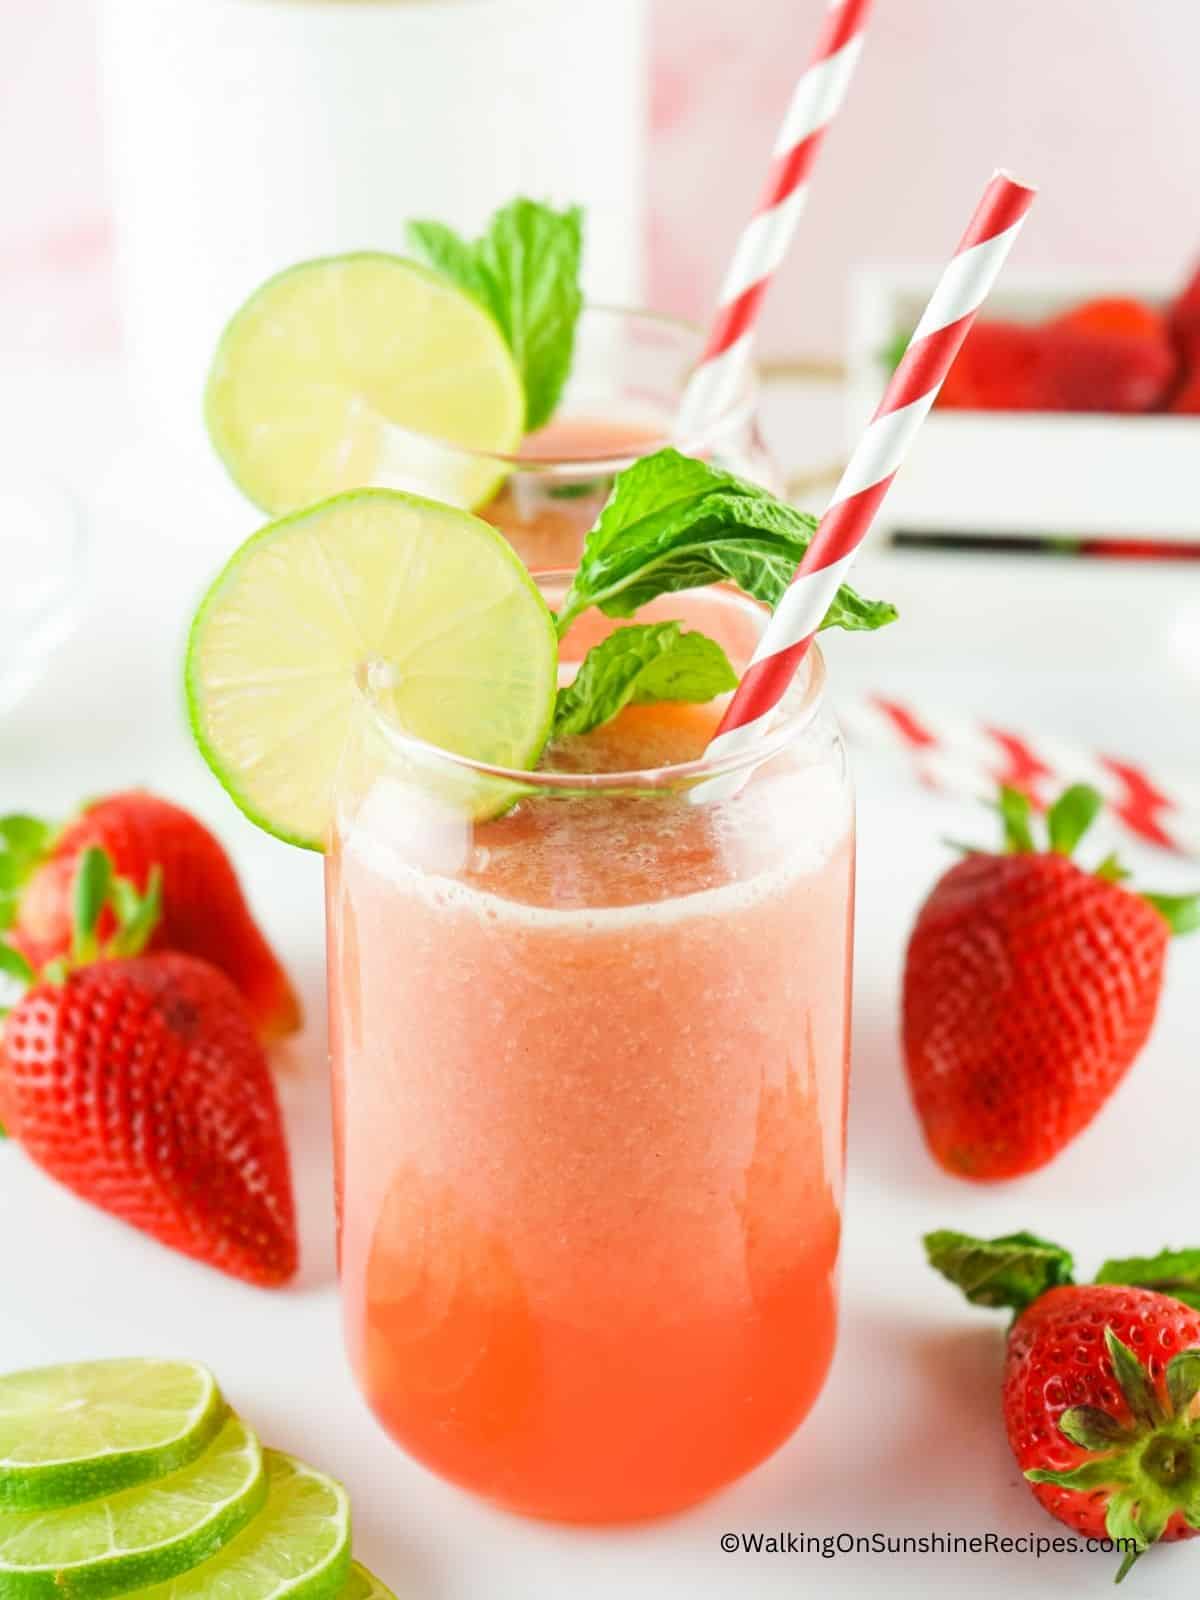 2 glasses of strawberry lime beverage with straws and fresh lime slices as garnish.